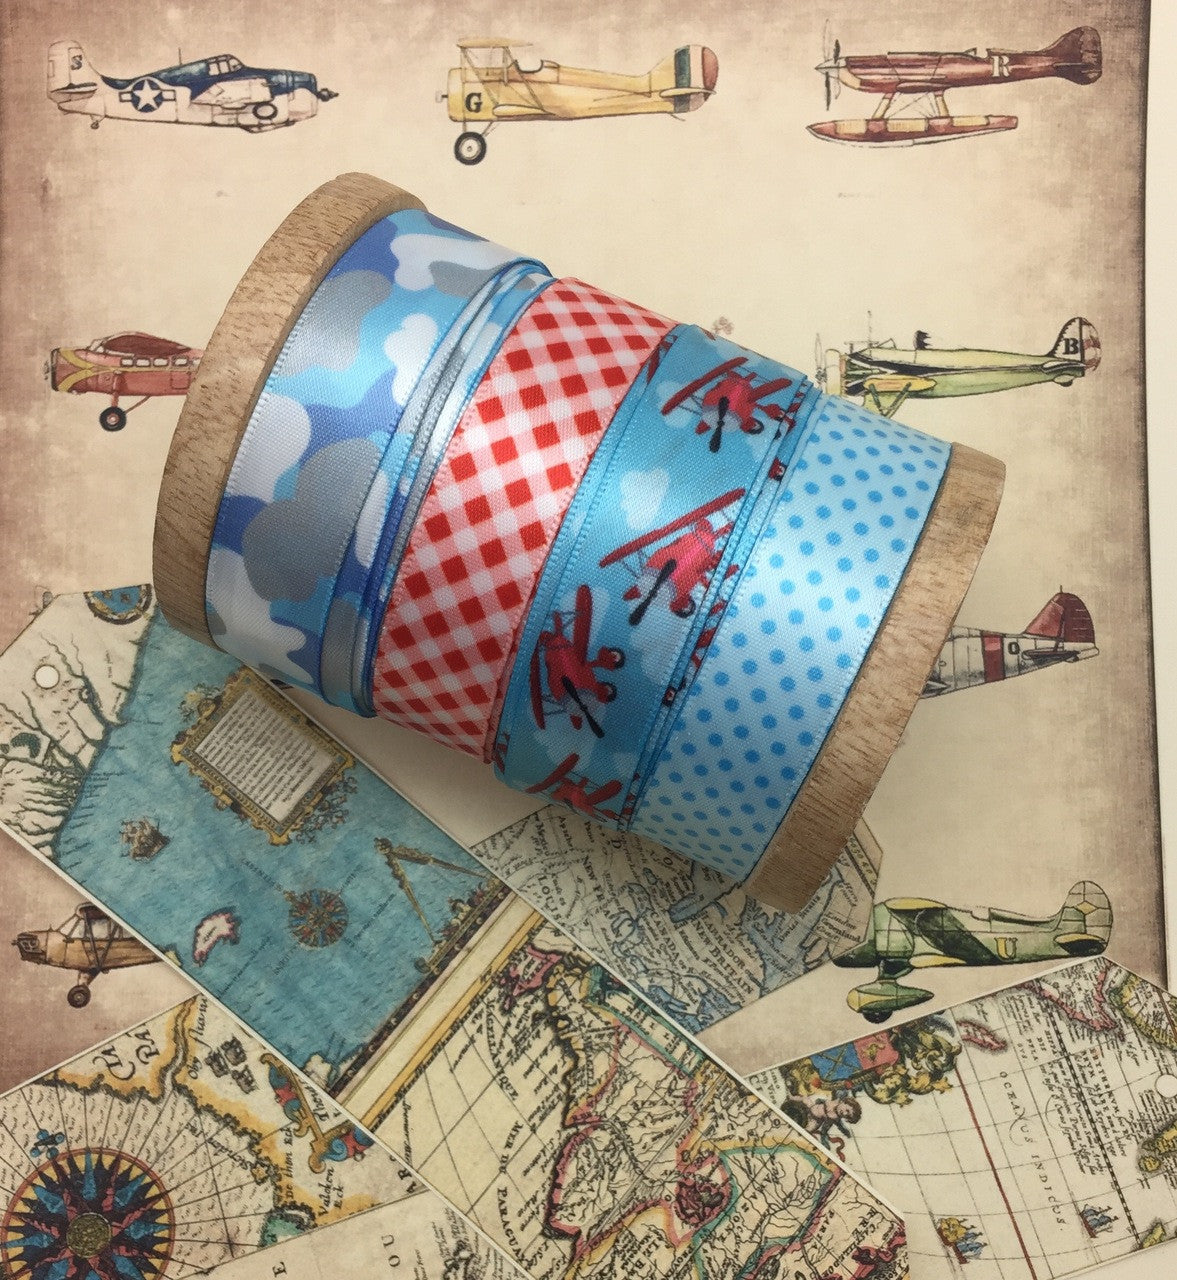 Mix and match our air plane ribbon with baby blue camouflage, red gingham, and blue on blue pin dots for a beautiful addition to an aviation themed party! 